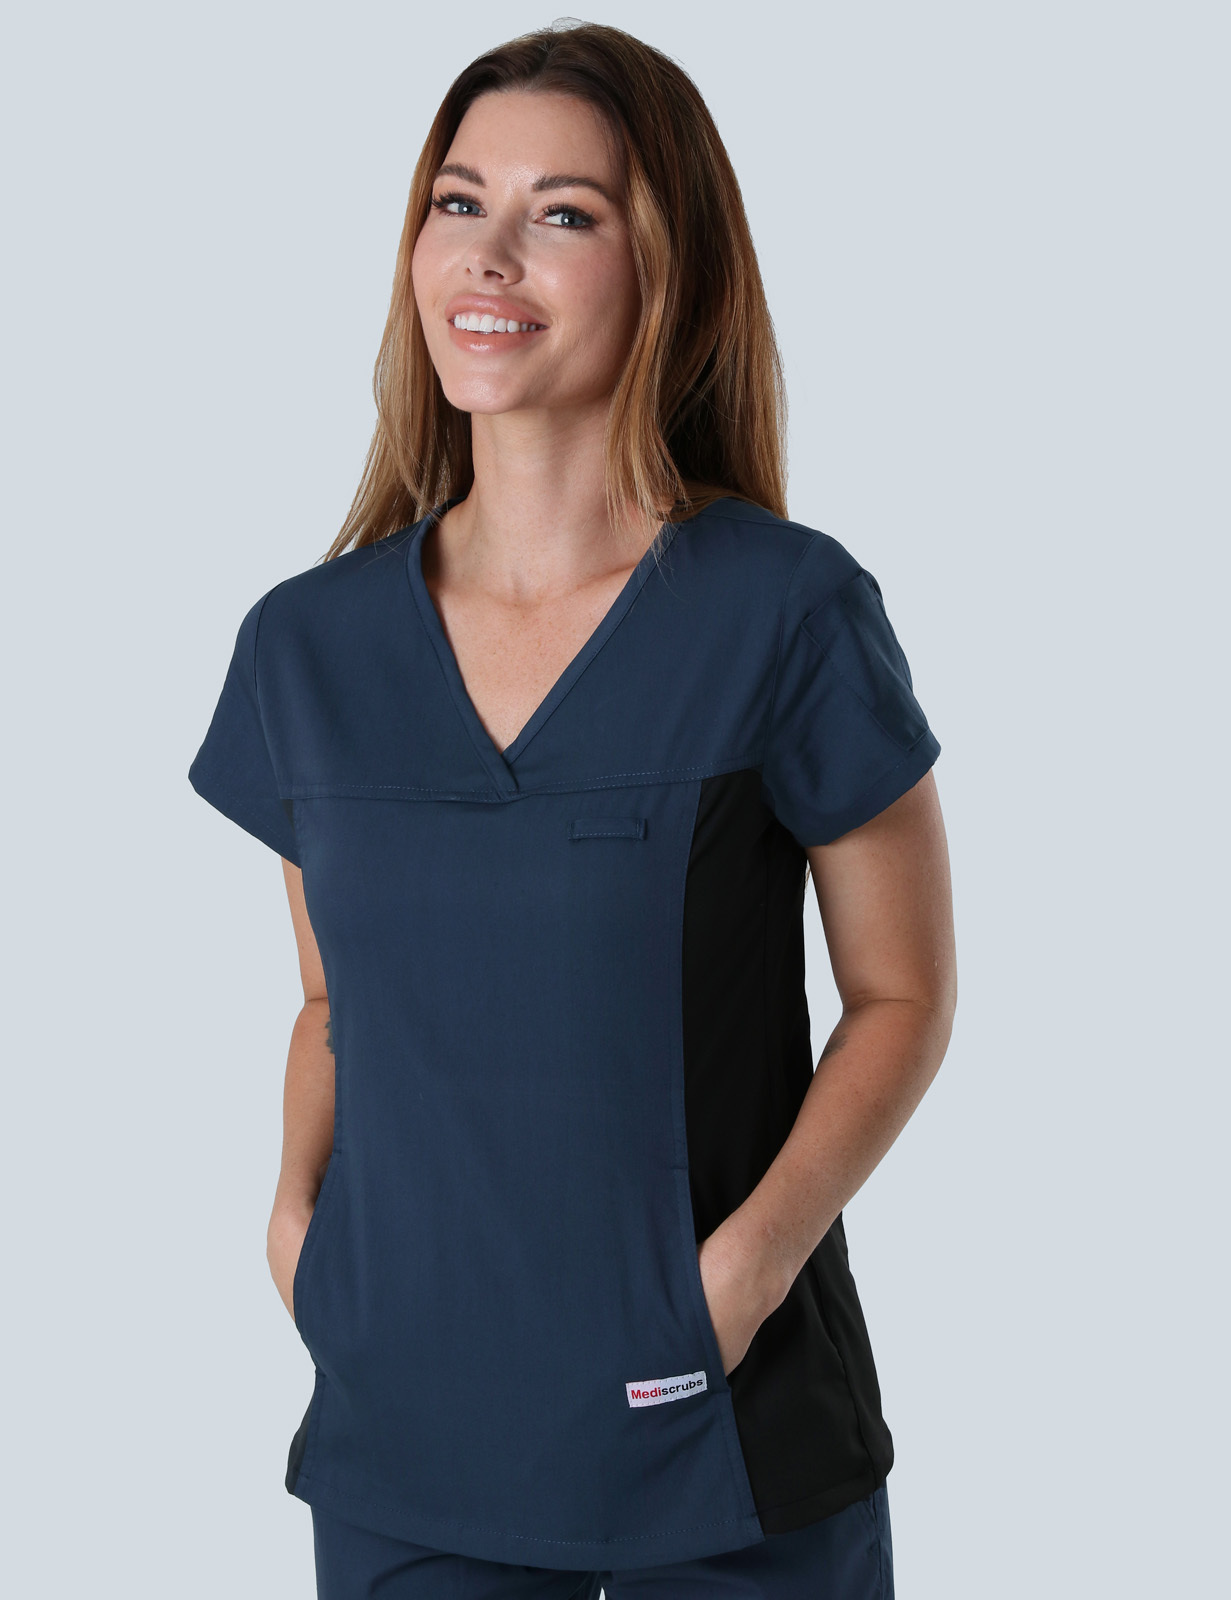 RBWH - 7A South EN (Women's Fit Spandex Scrub Top and Cargo Pants in Navy incl Logos)